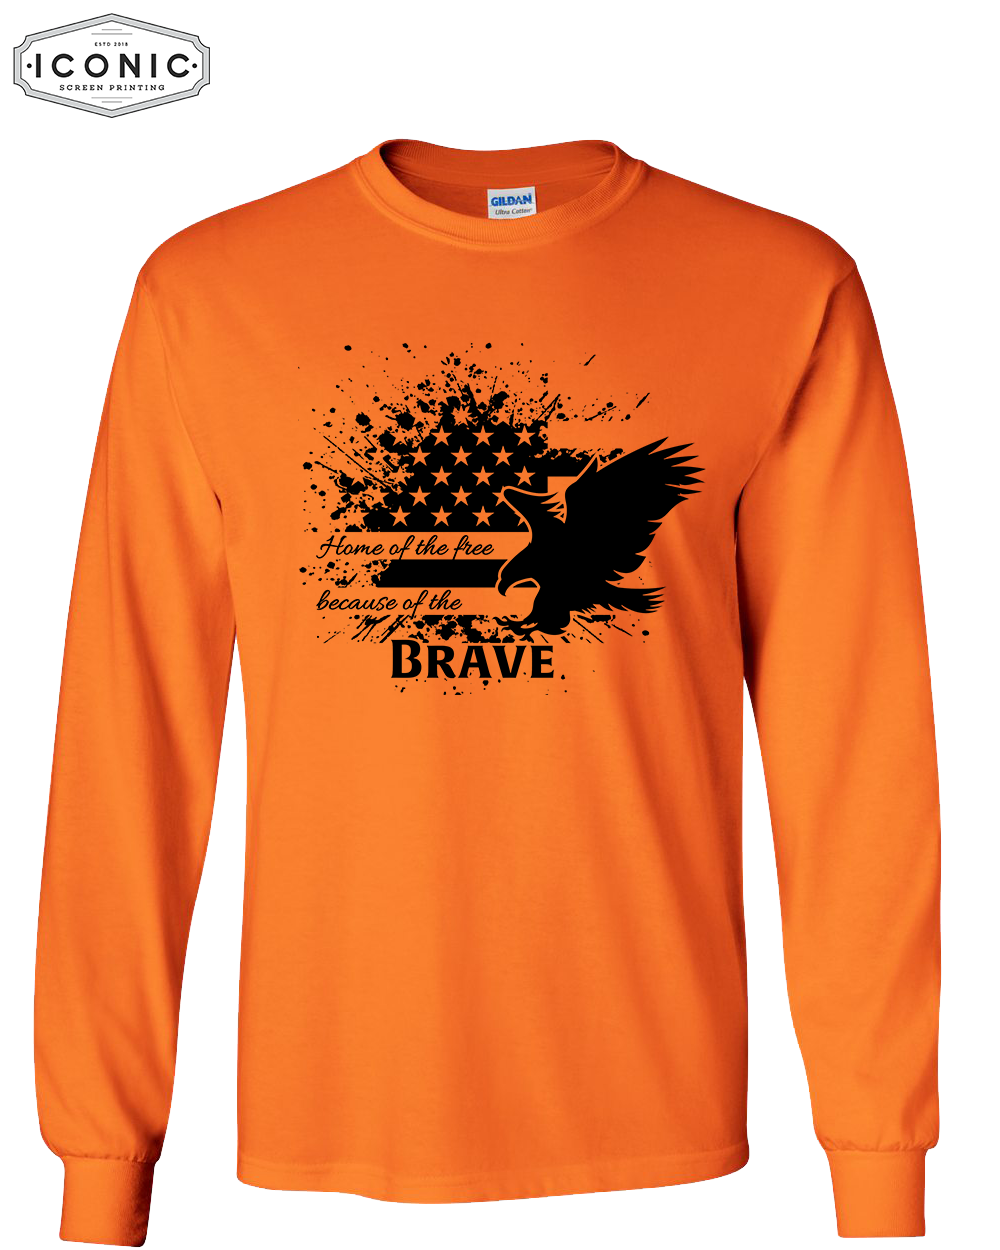 Because of the Brave - Ultra Cotton Long Sleeve